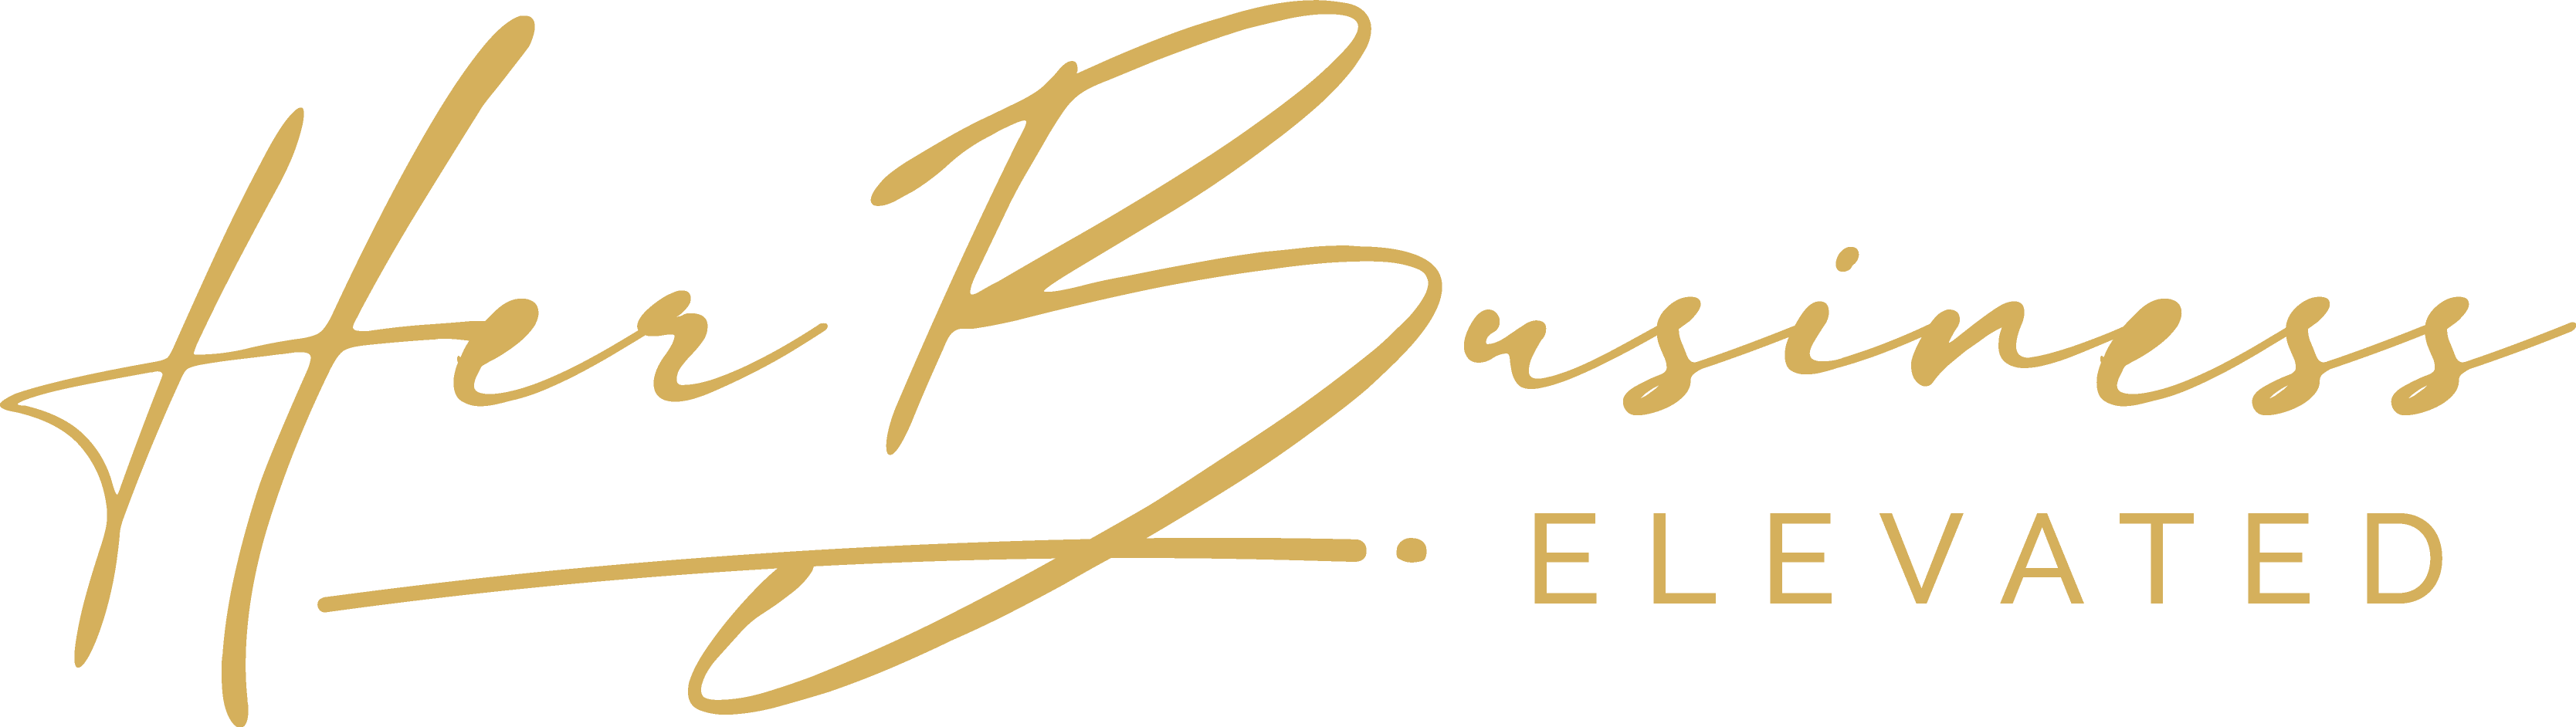 HER Business Elevated logo